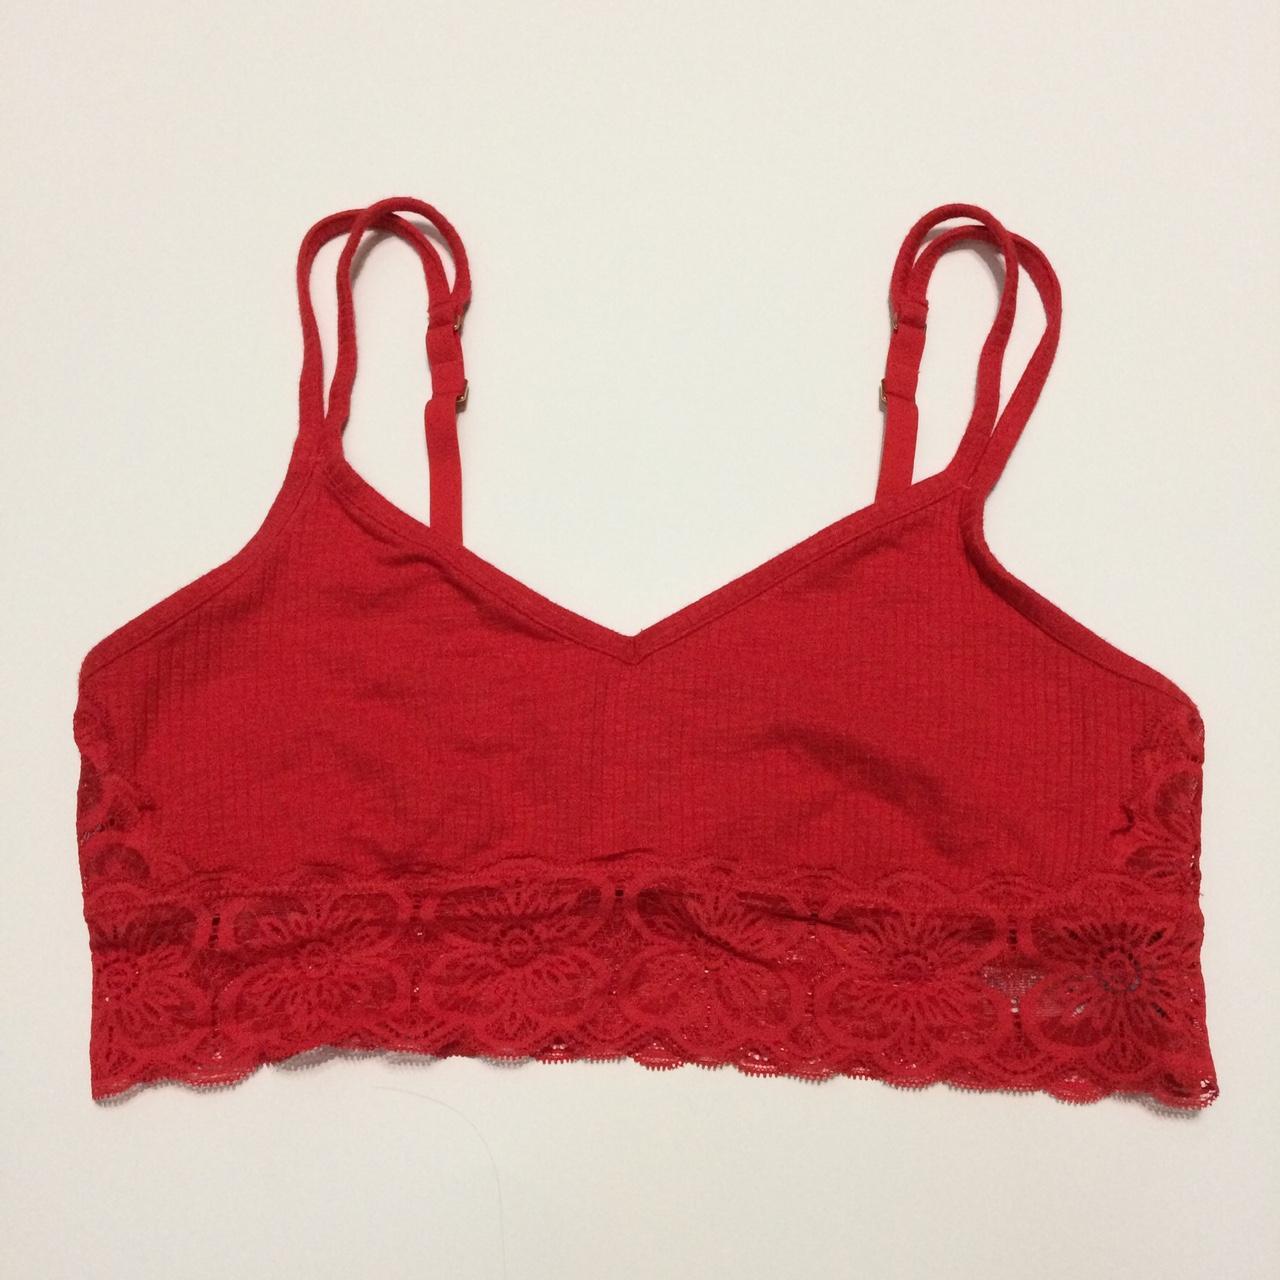 Aerie red bralette size large